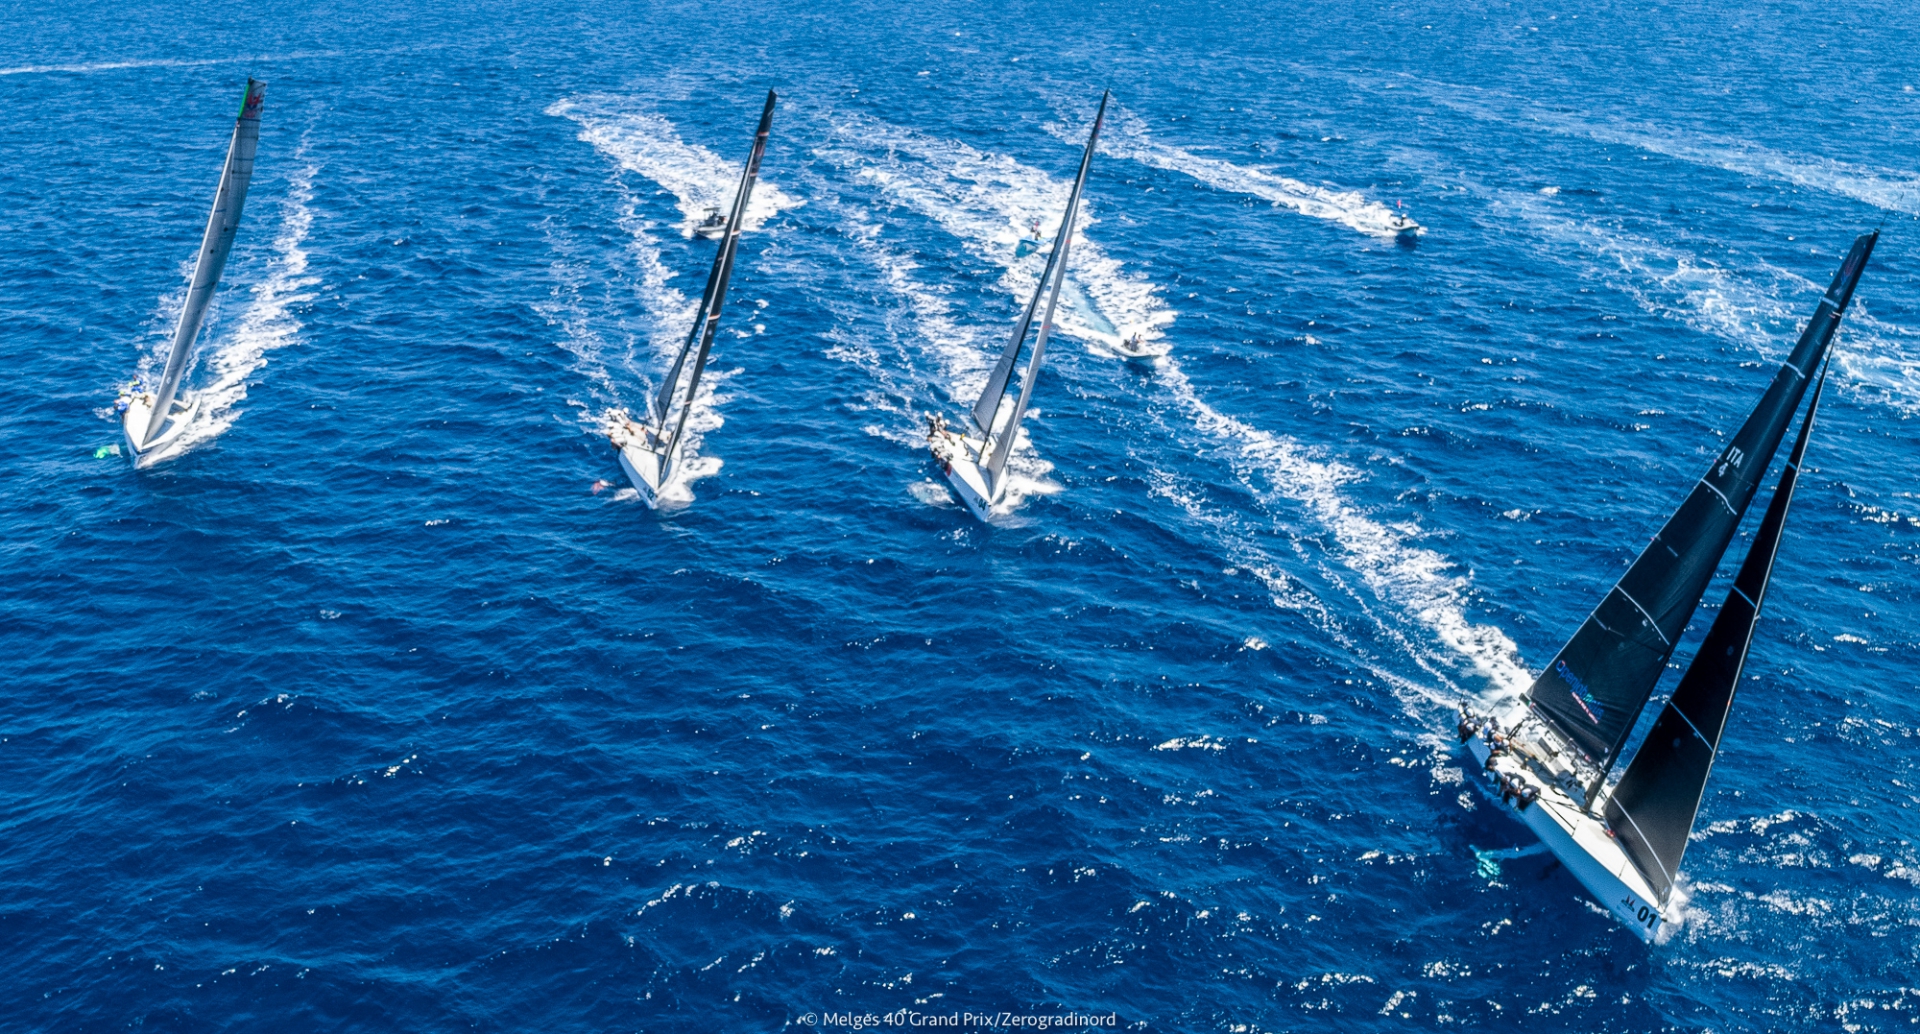 One Ocean Melges 40 Grand Prix - Images race Day 3 online - NEWS - Yacht Club Costa Smeralda